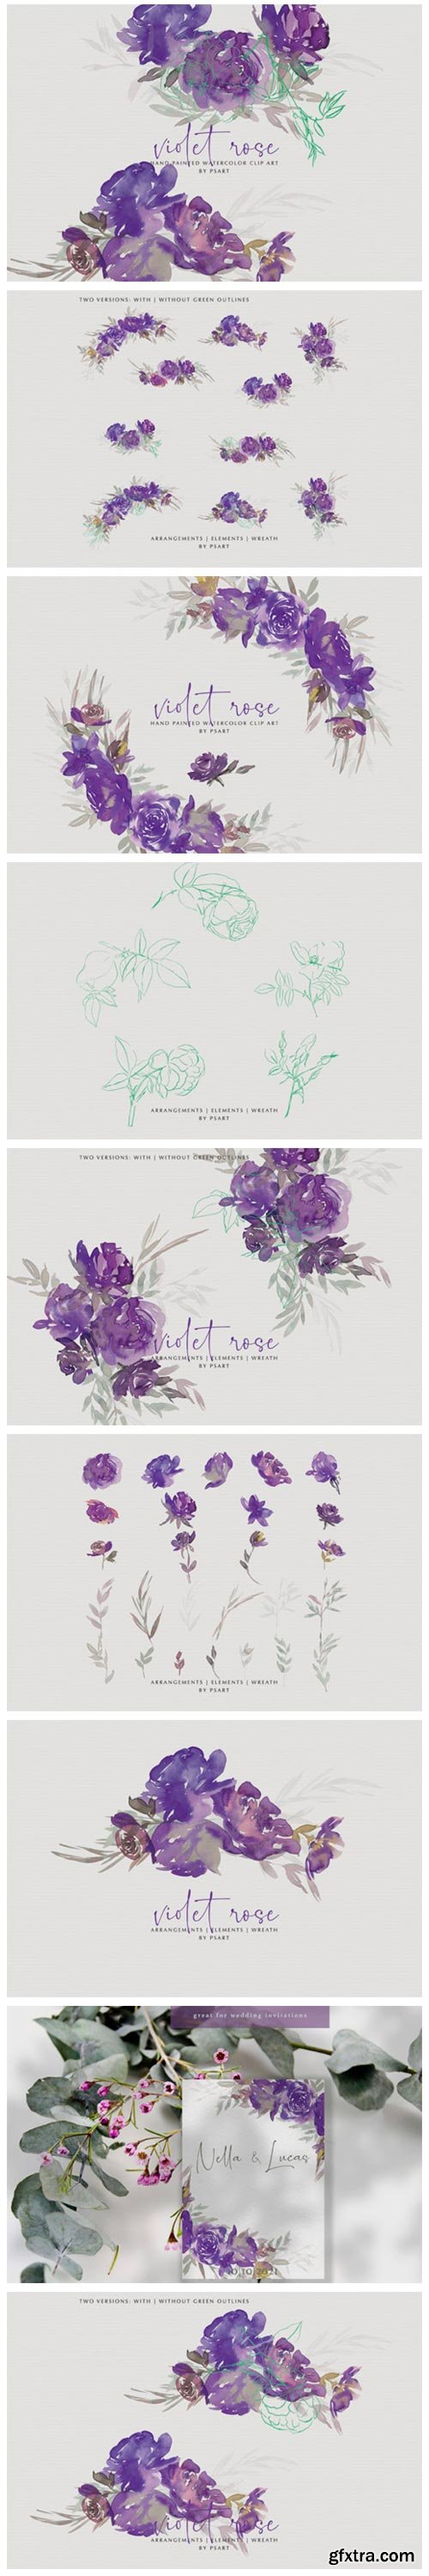 Watercolor Violet Rose Clipart Collection 4086622